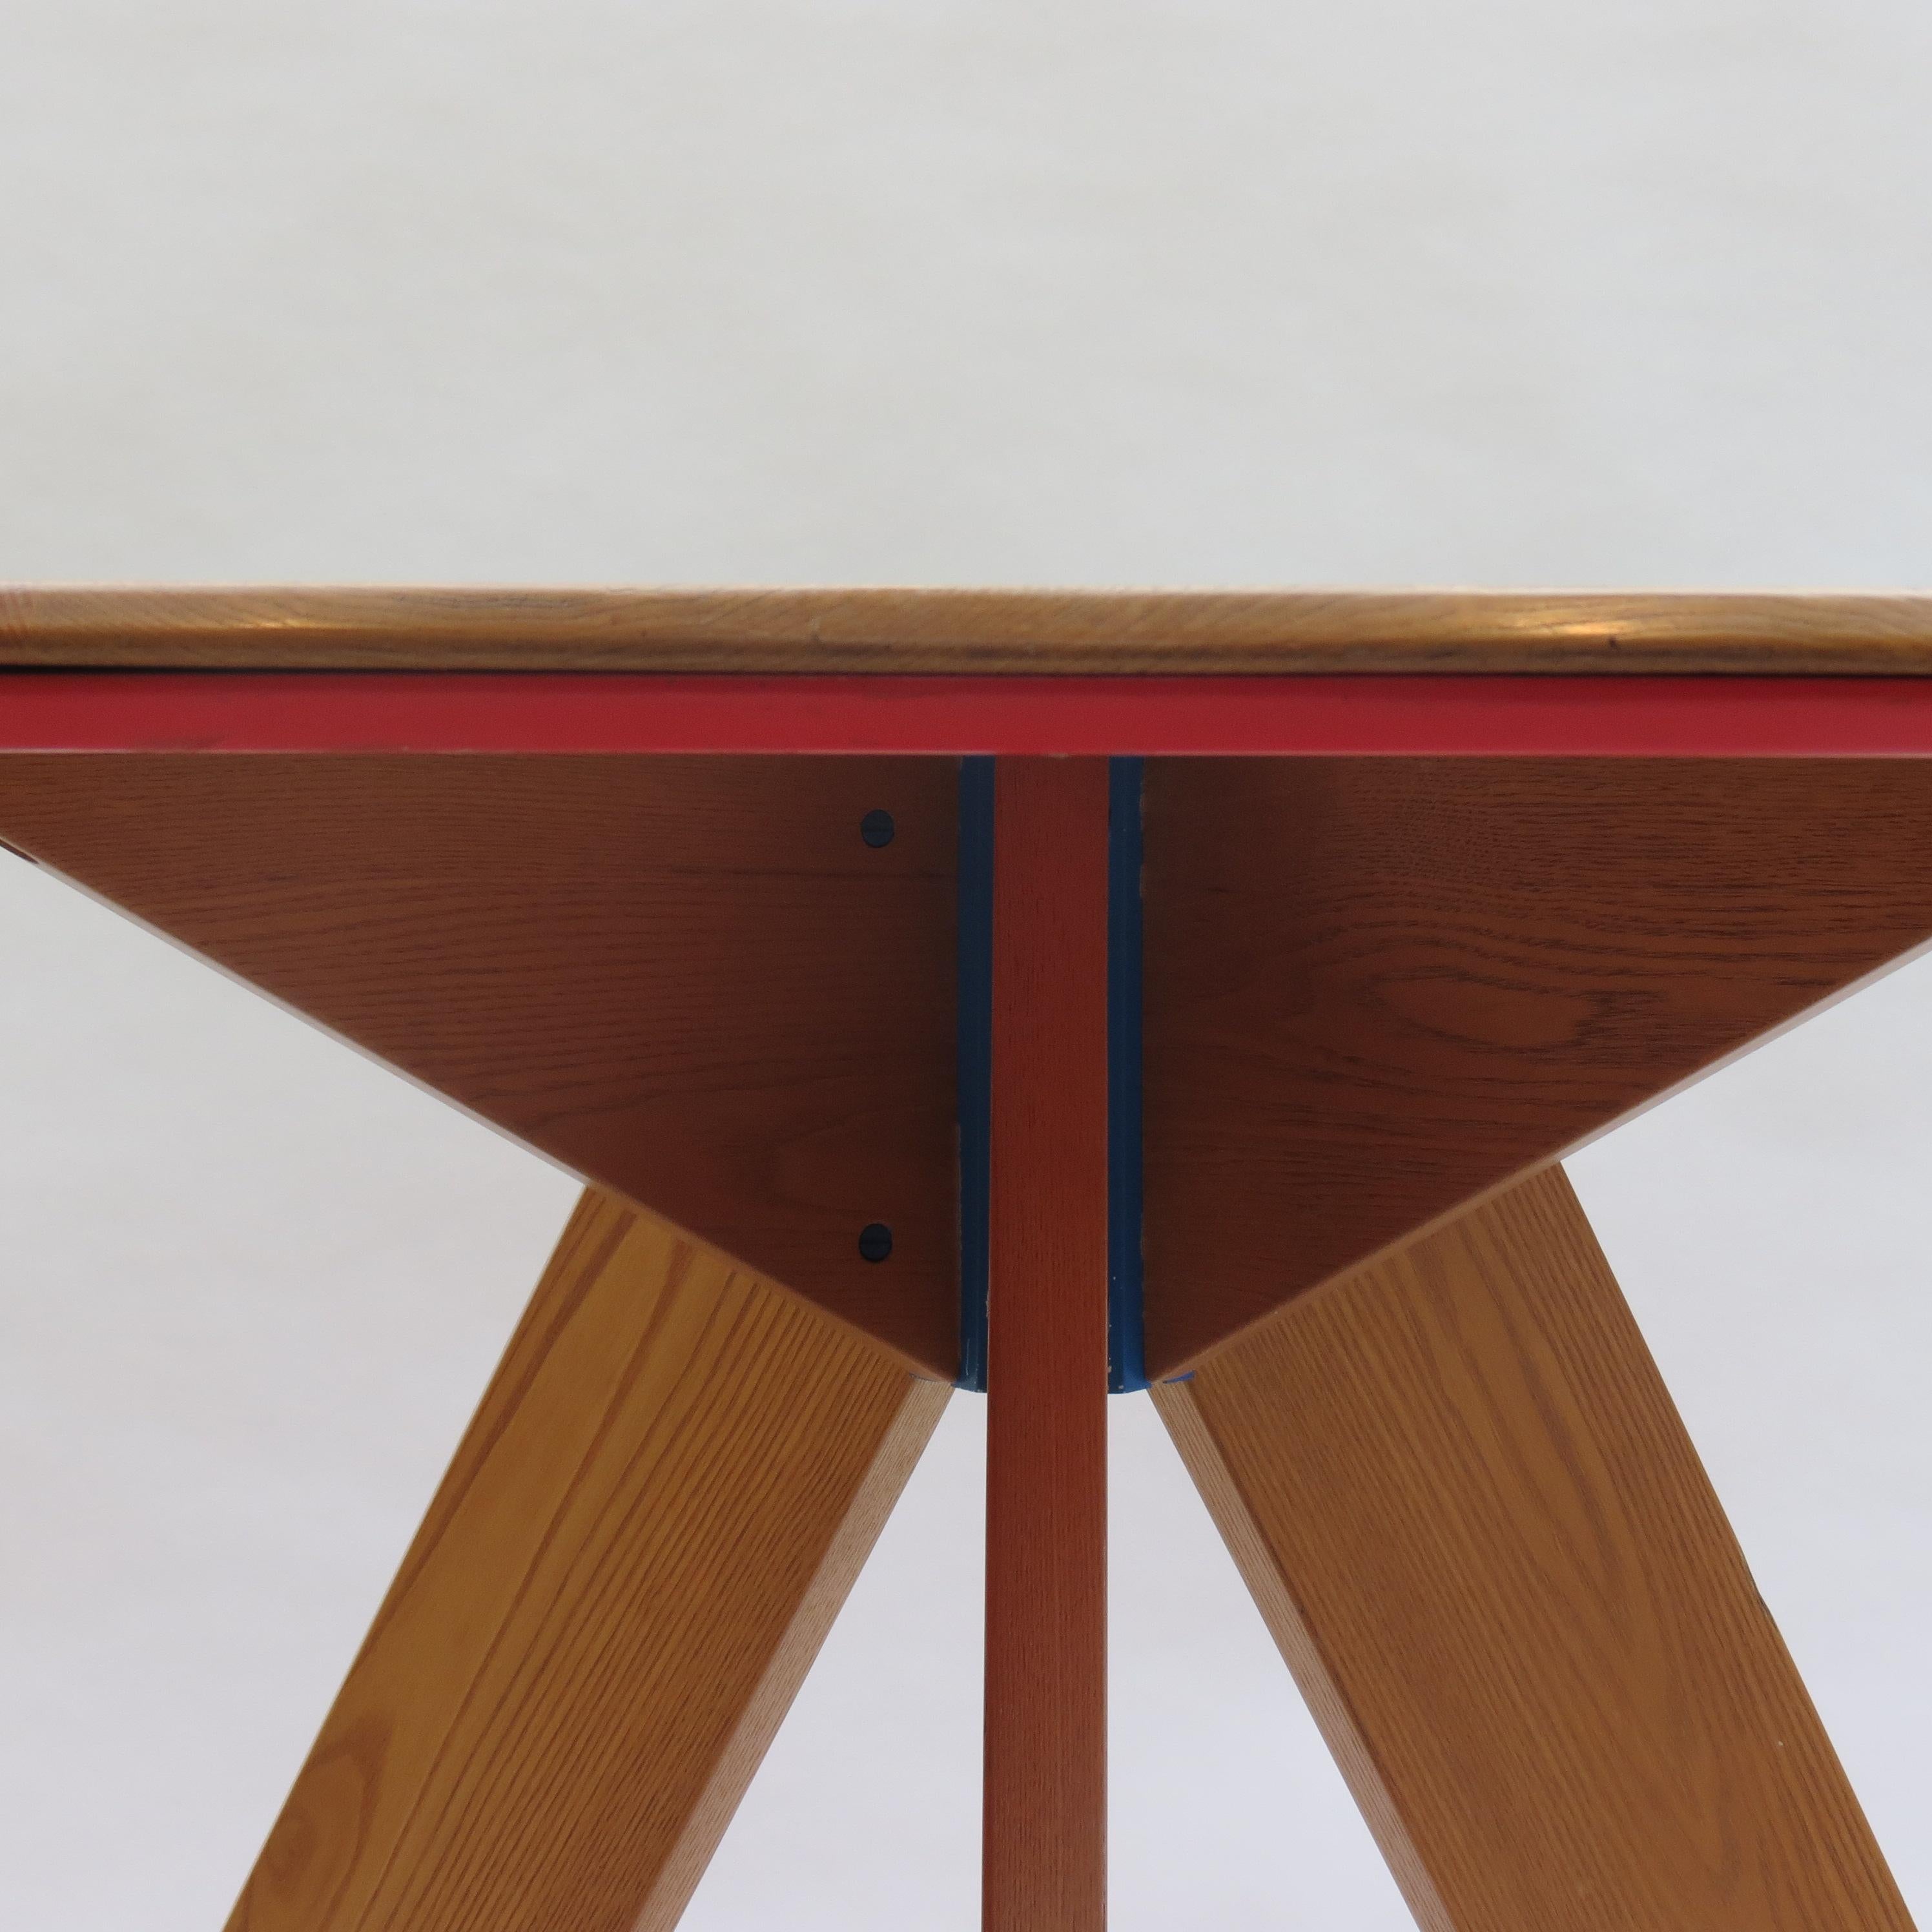 English Midcentury Bespoke Circular Ash Dining Table by David Field 1980s with Red Blue